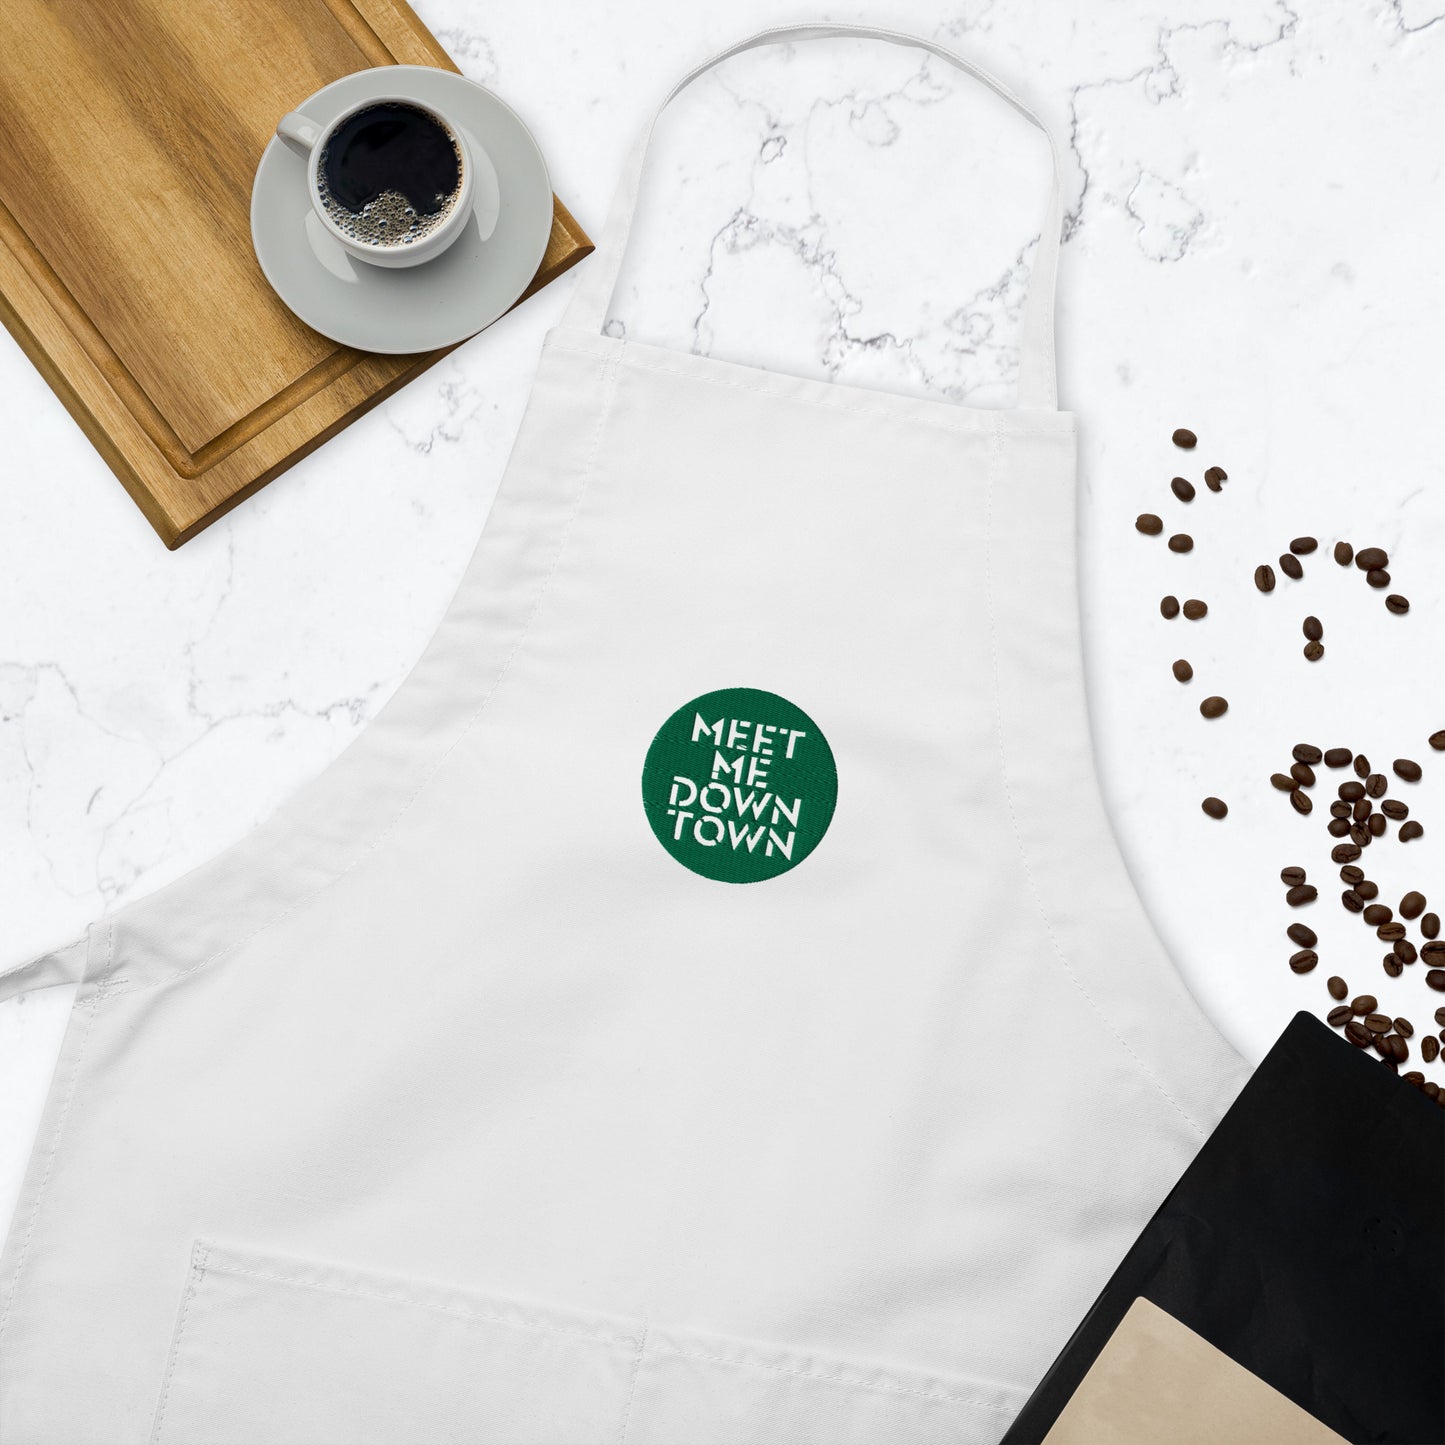 "Meet Me Downtown" (Green) Embroidered Apron